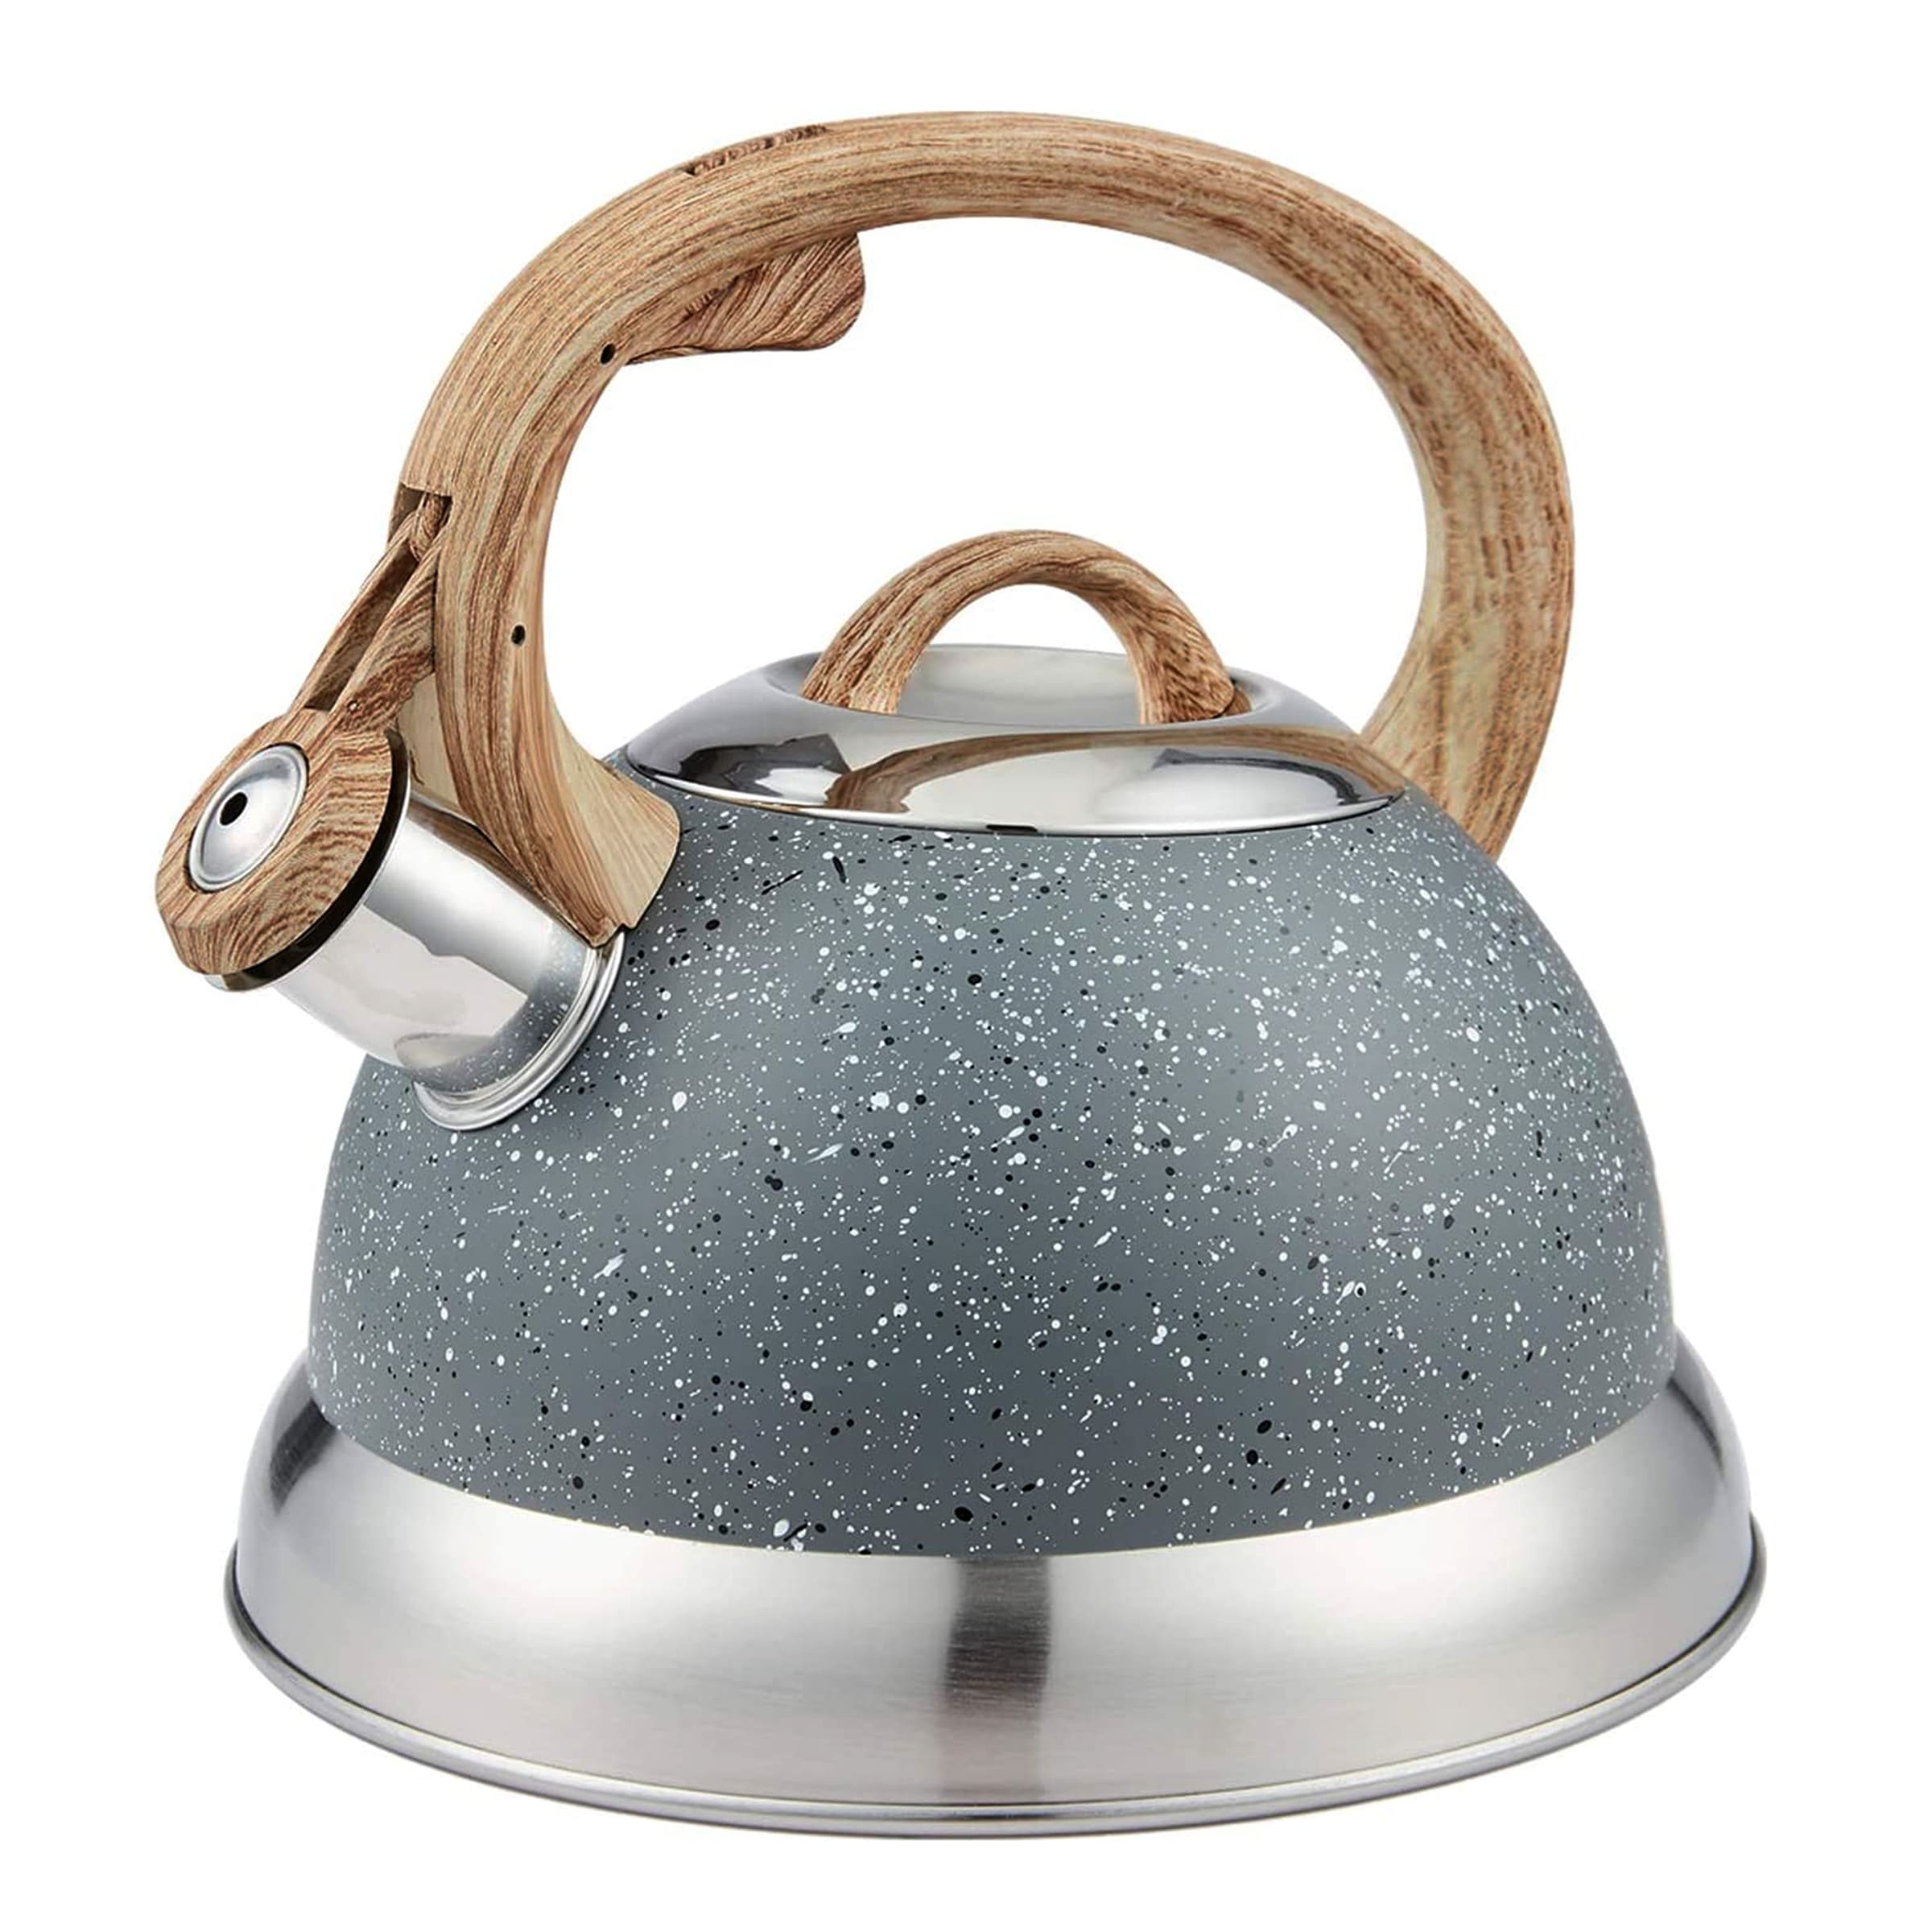 MegaChef 1.8Lt Stainless Steel body and Glass Electric Tea Kettle